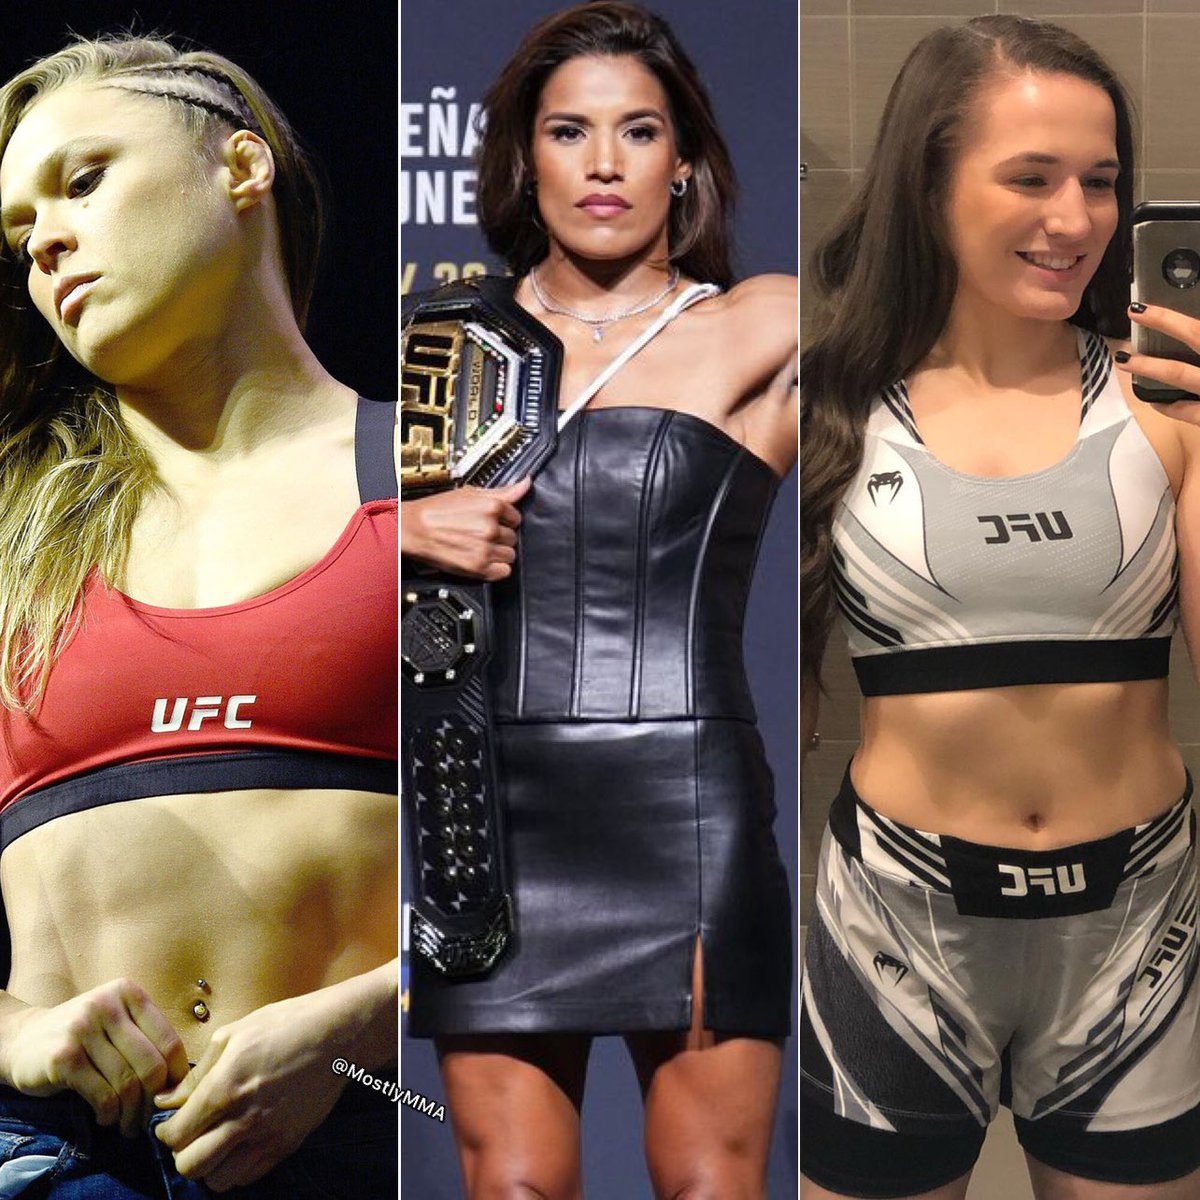 Ronda Rousey rumors circulating for vacant title fight. 
How would she do against Julianna Peña or Erin Blanchfield ?